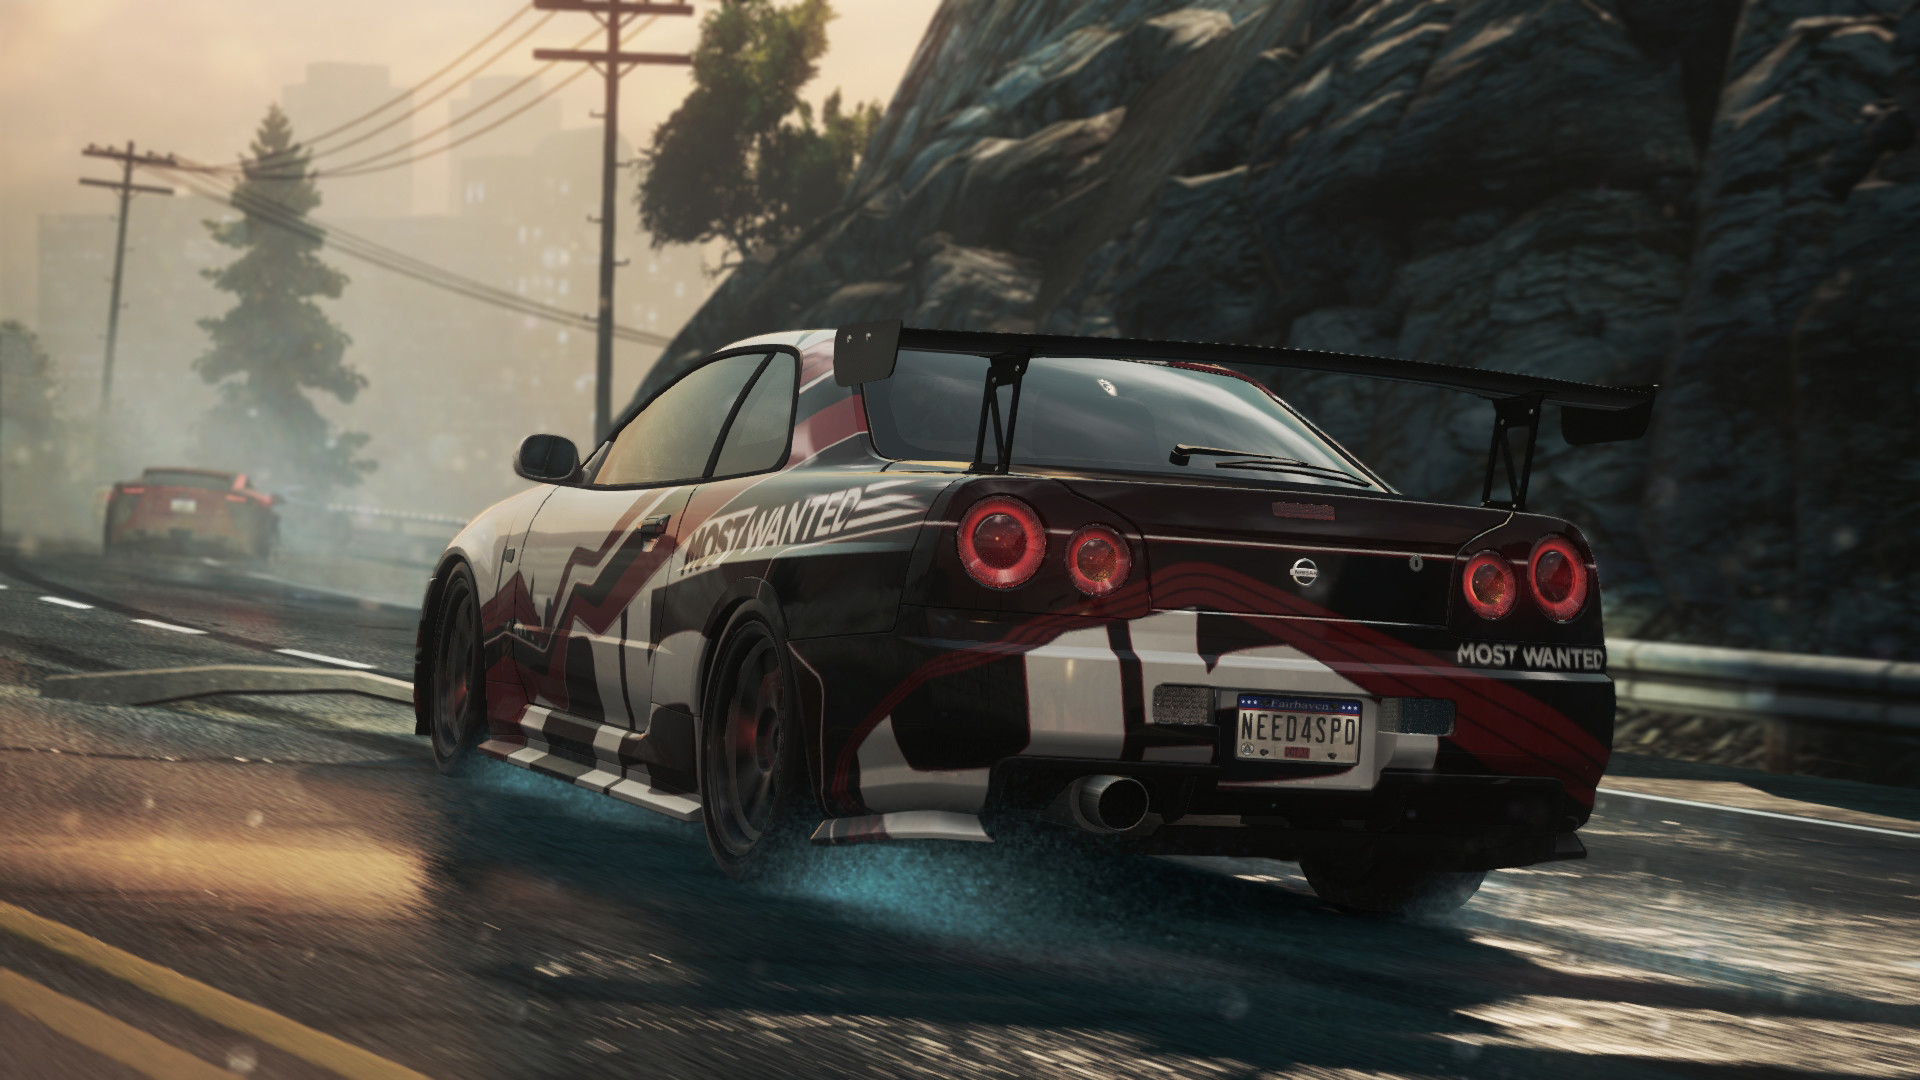 1920x1080  Wallpaper need for speed, nissan skyline gt-r, most wanted, 2012